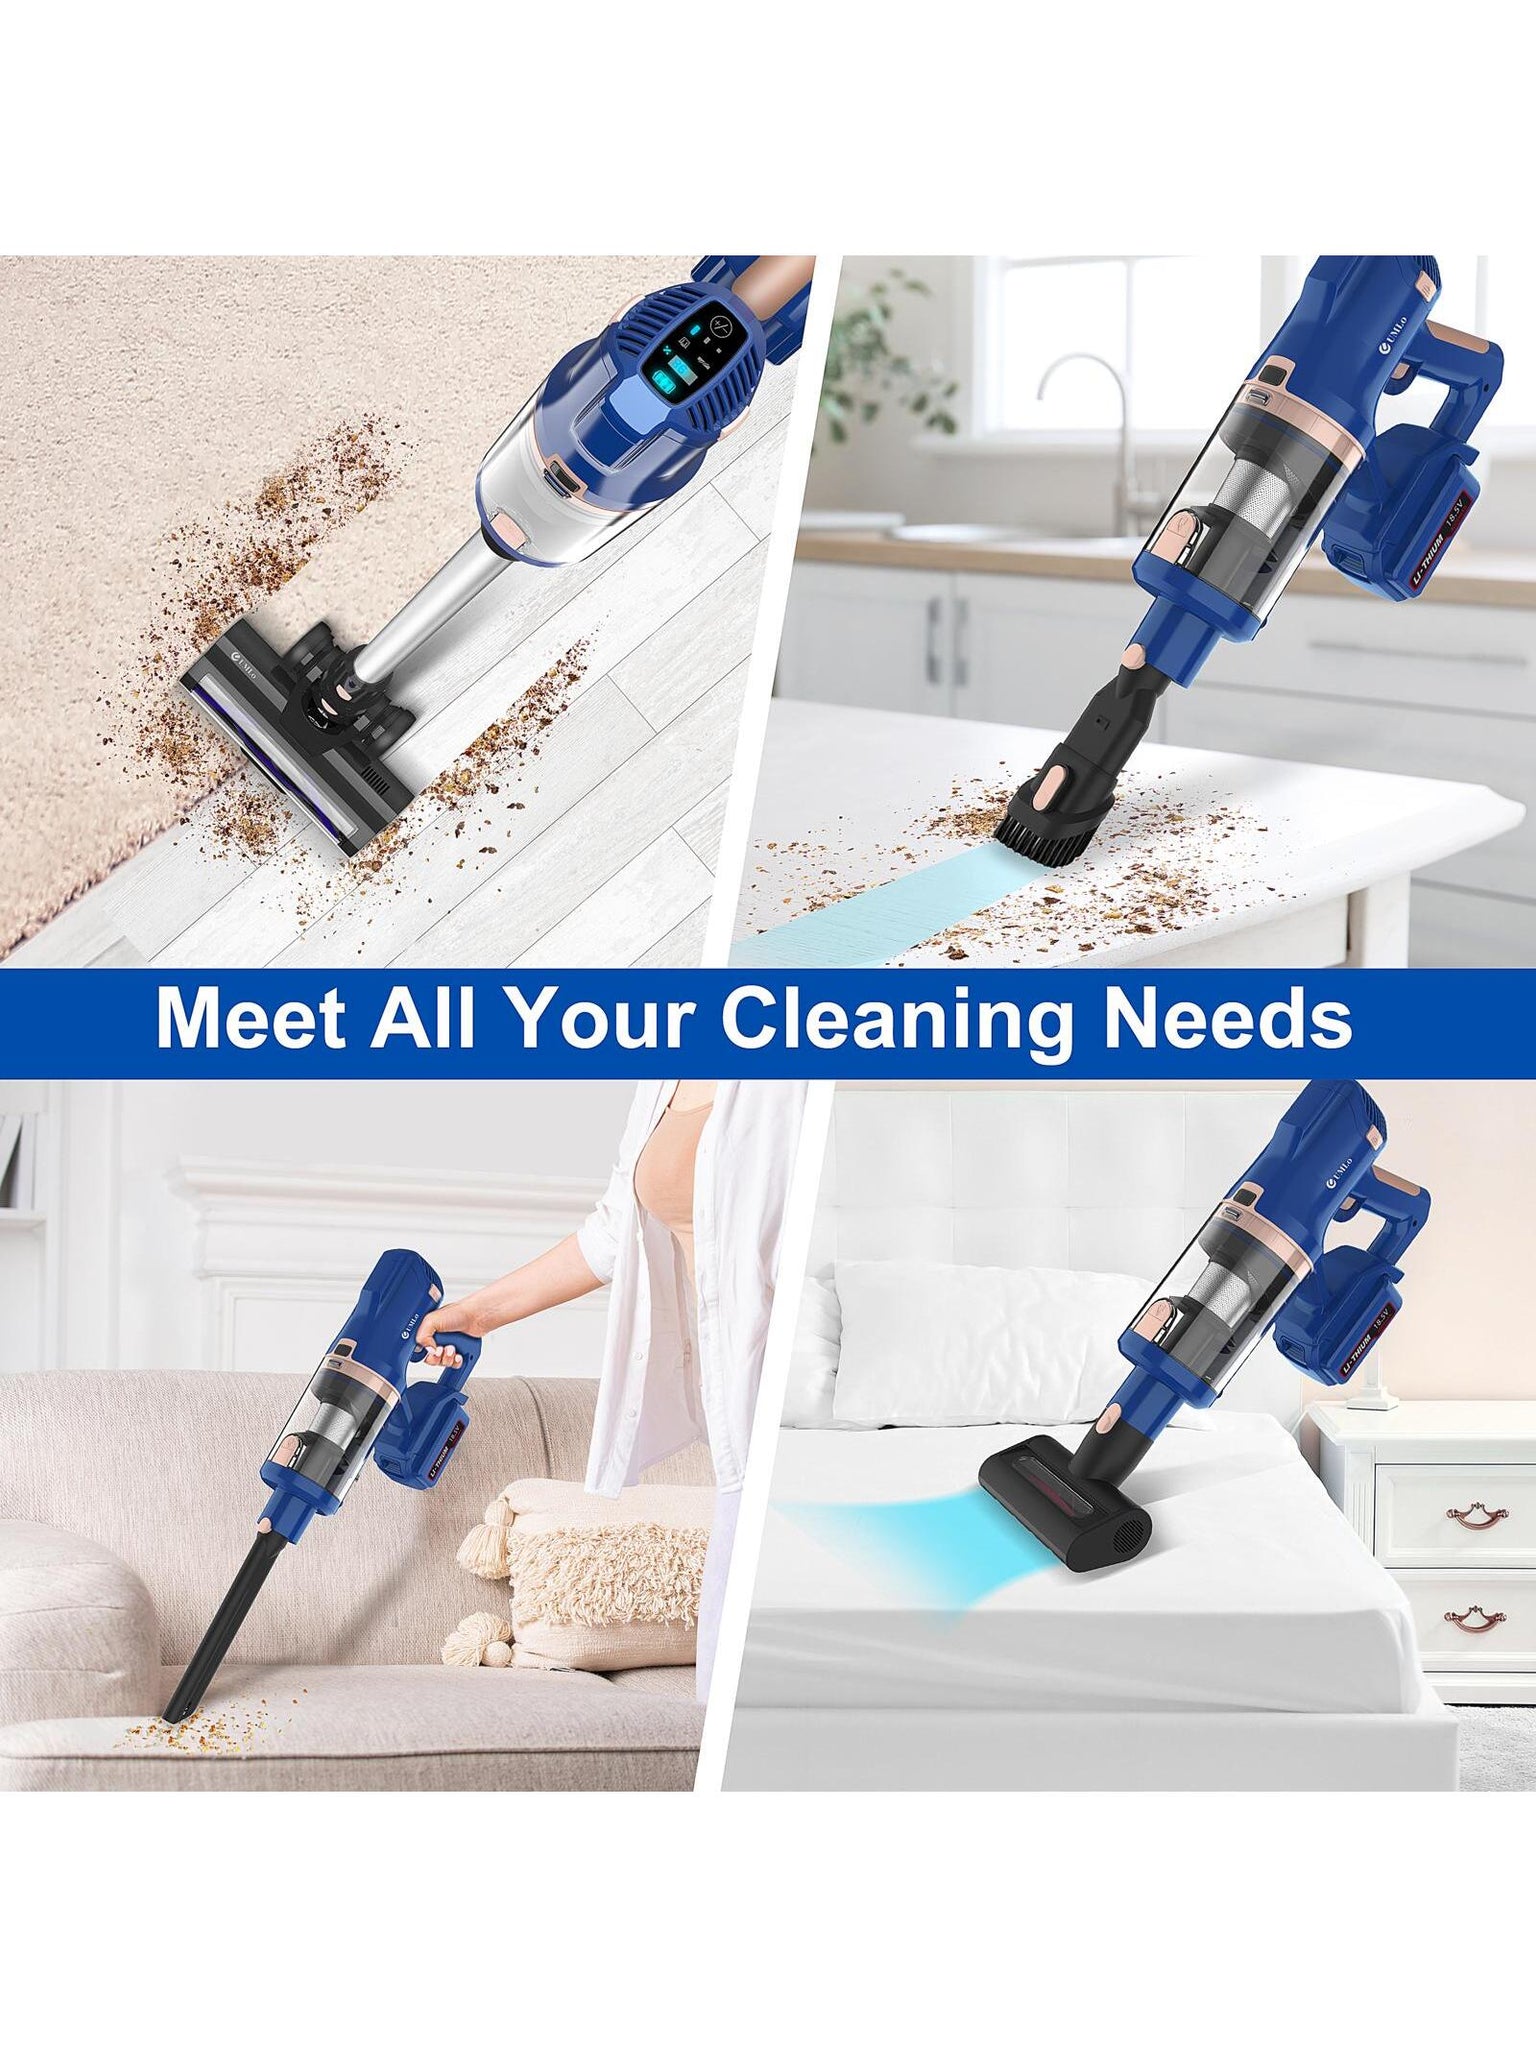 UMLo Cordless Vacuum Cleaner, 265W 25Kpa Stick Vacuum 4000mAh Rechargeable Battery Vacuum up to 60min Runtime, 8 in 1 LED Lightweight Vacuum for Pet Hair Carpet Hard Floor